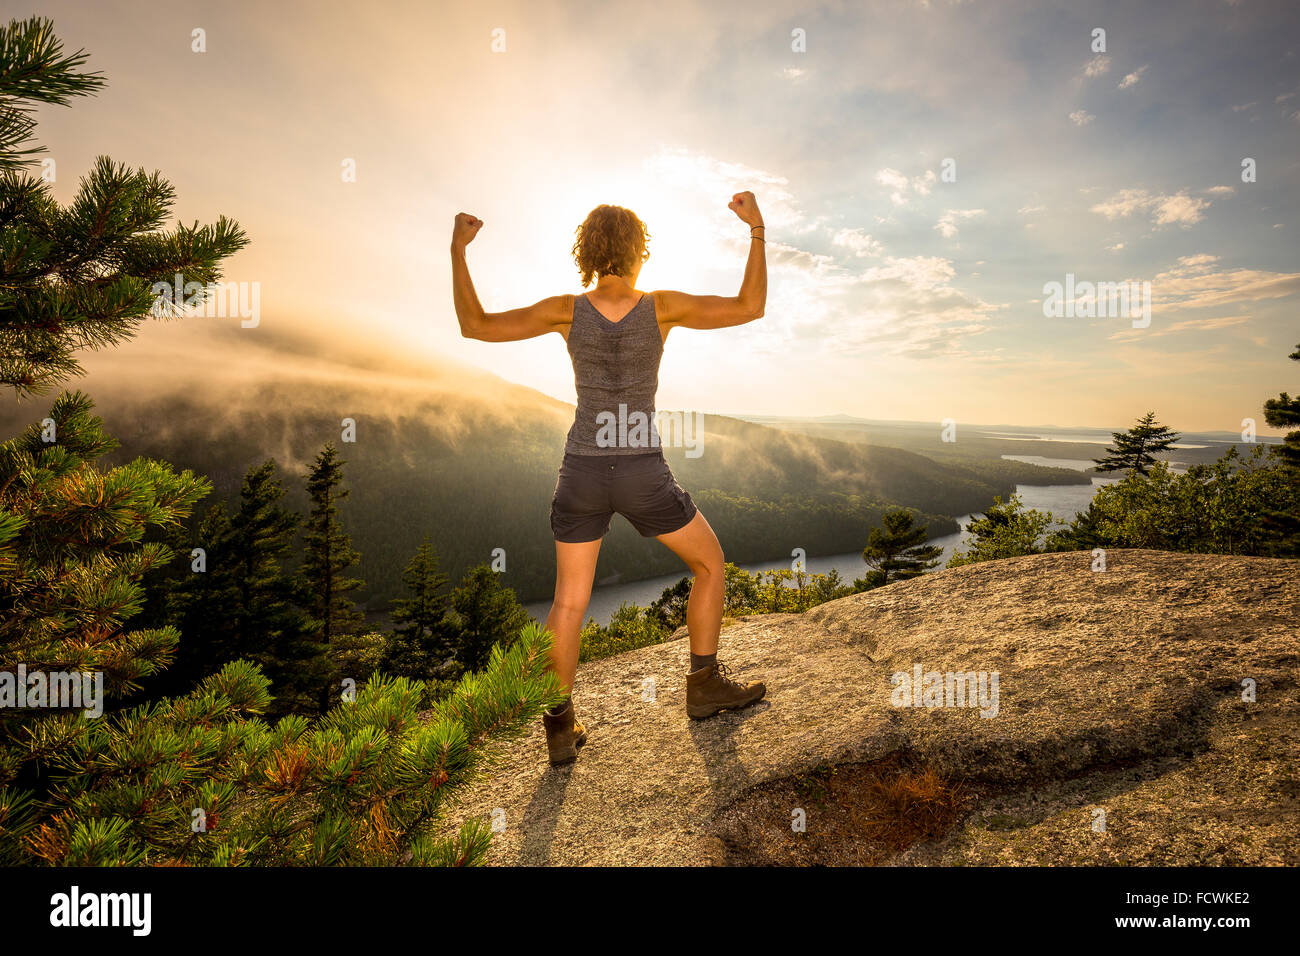 A young woman flexes on a mountaintop overlook in Acadia National Park, Mount Desert Island, Maine, New England, USA. Stock Photo